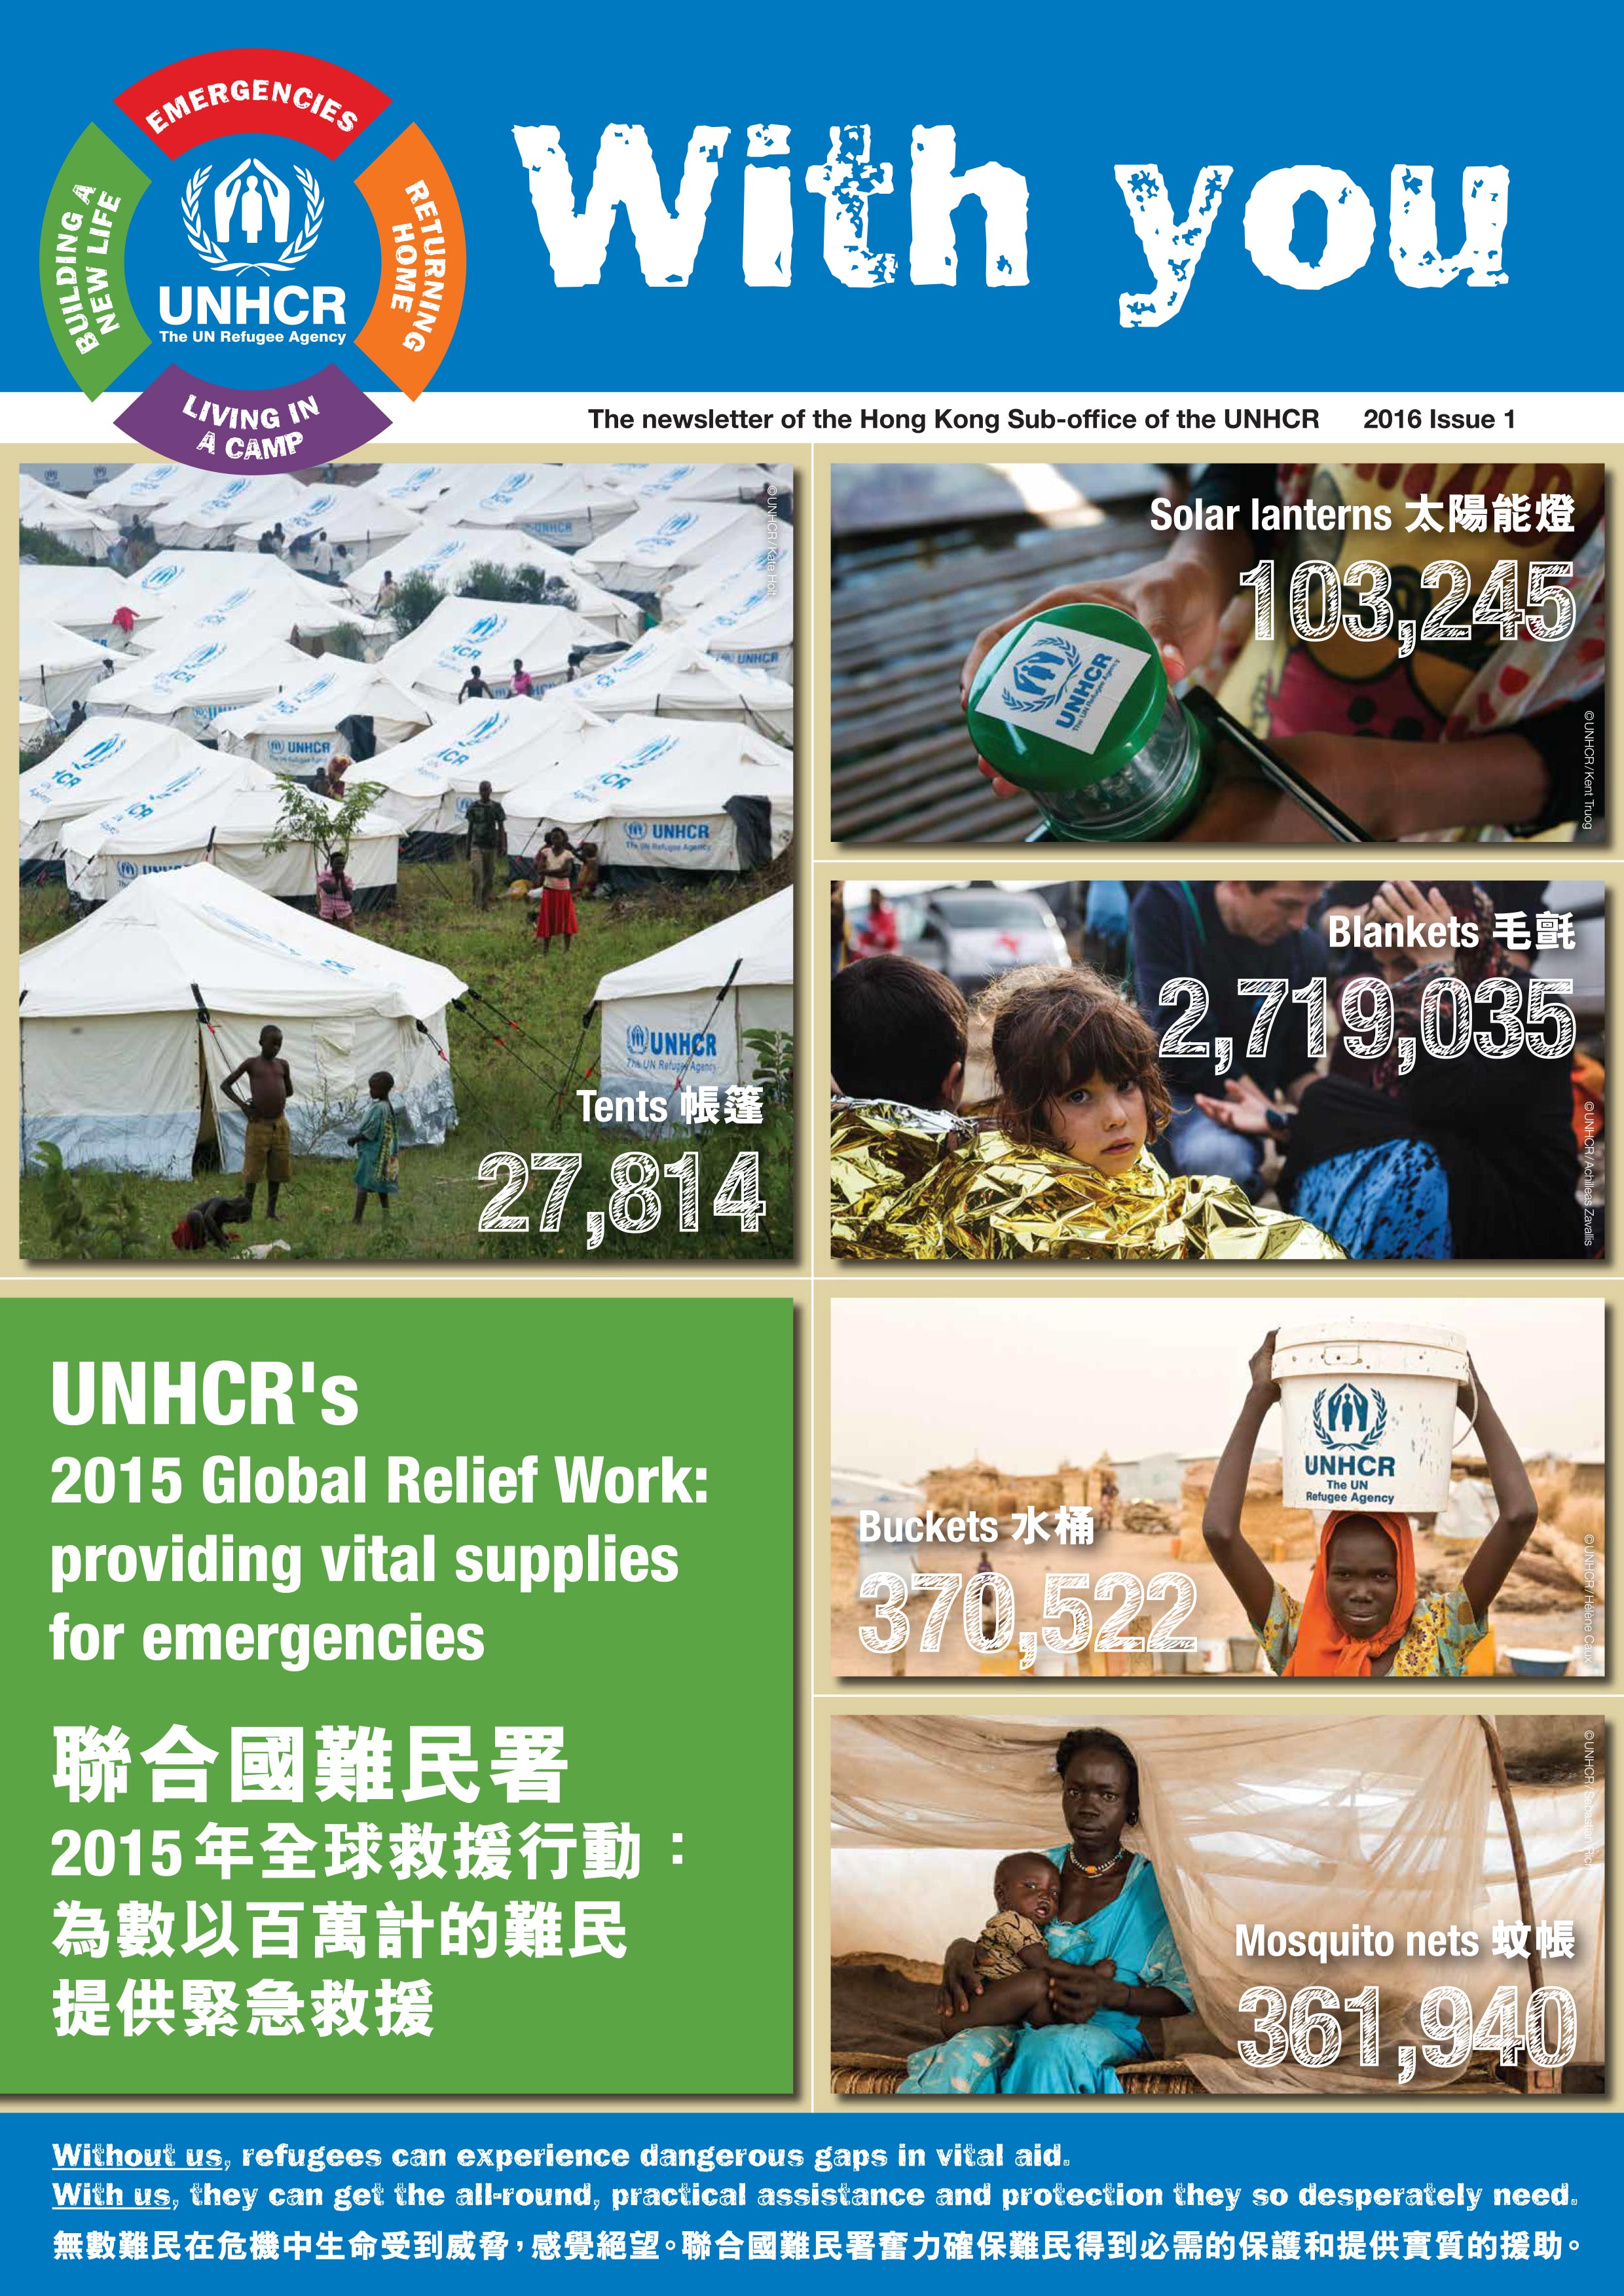 UNHCR's 2015 Global Relief Work: Providing vital supplies for emergencies